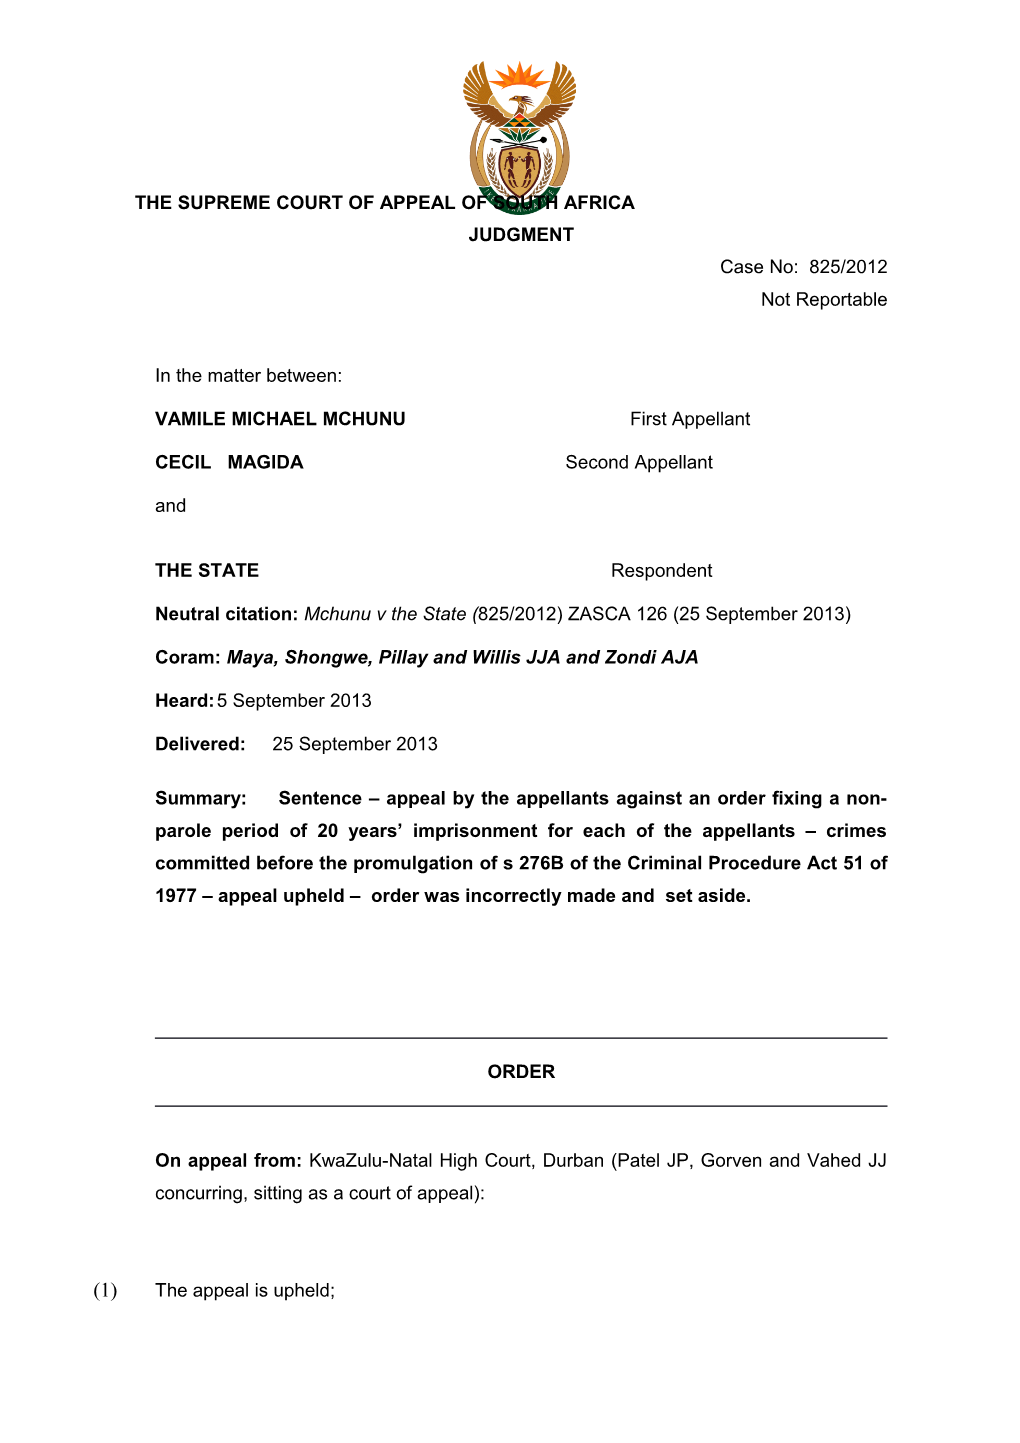 The Supreme Court of Appeal of South Africa s28